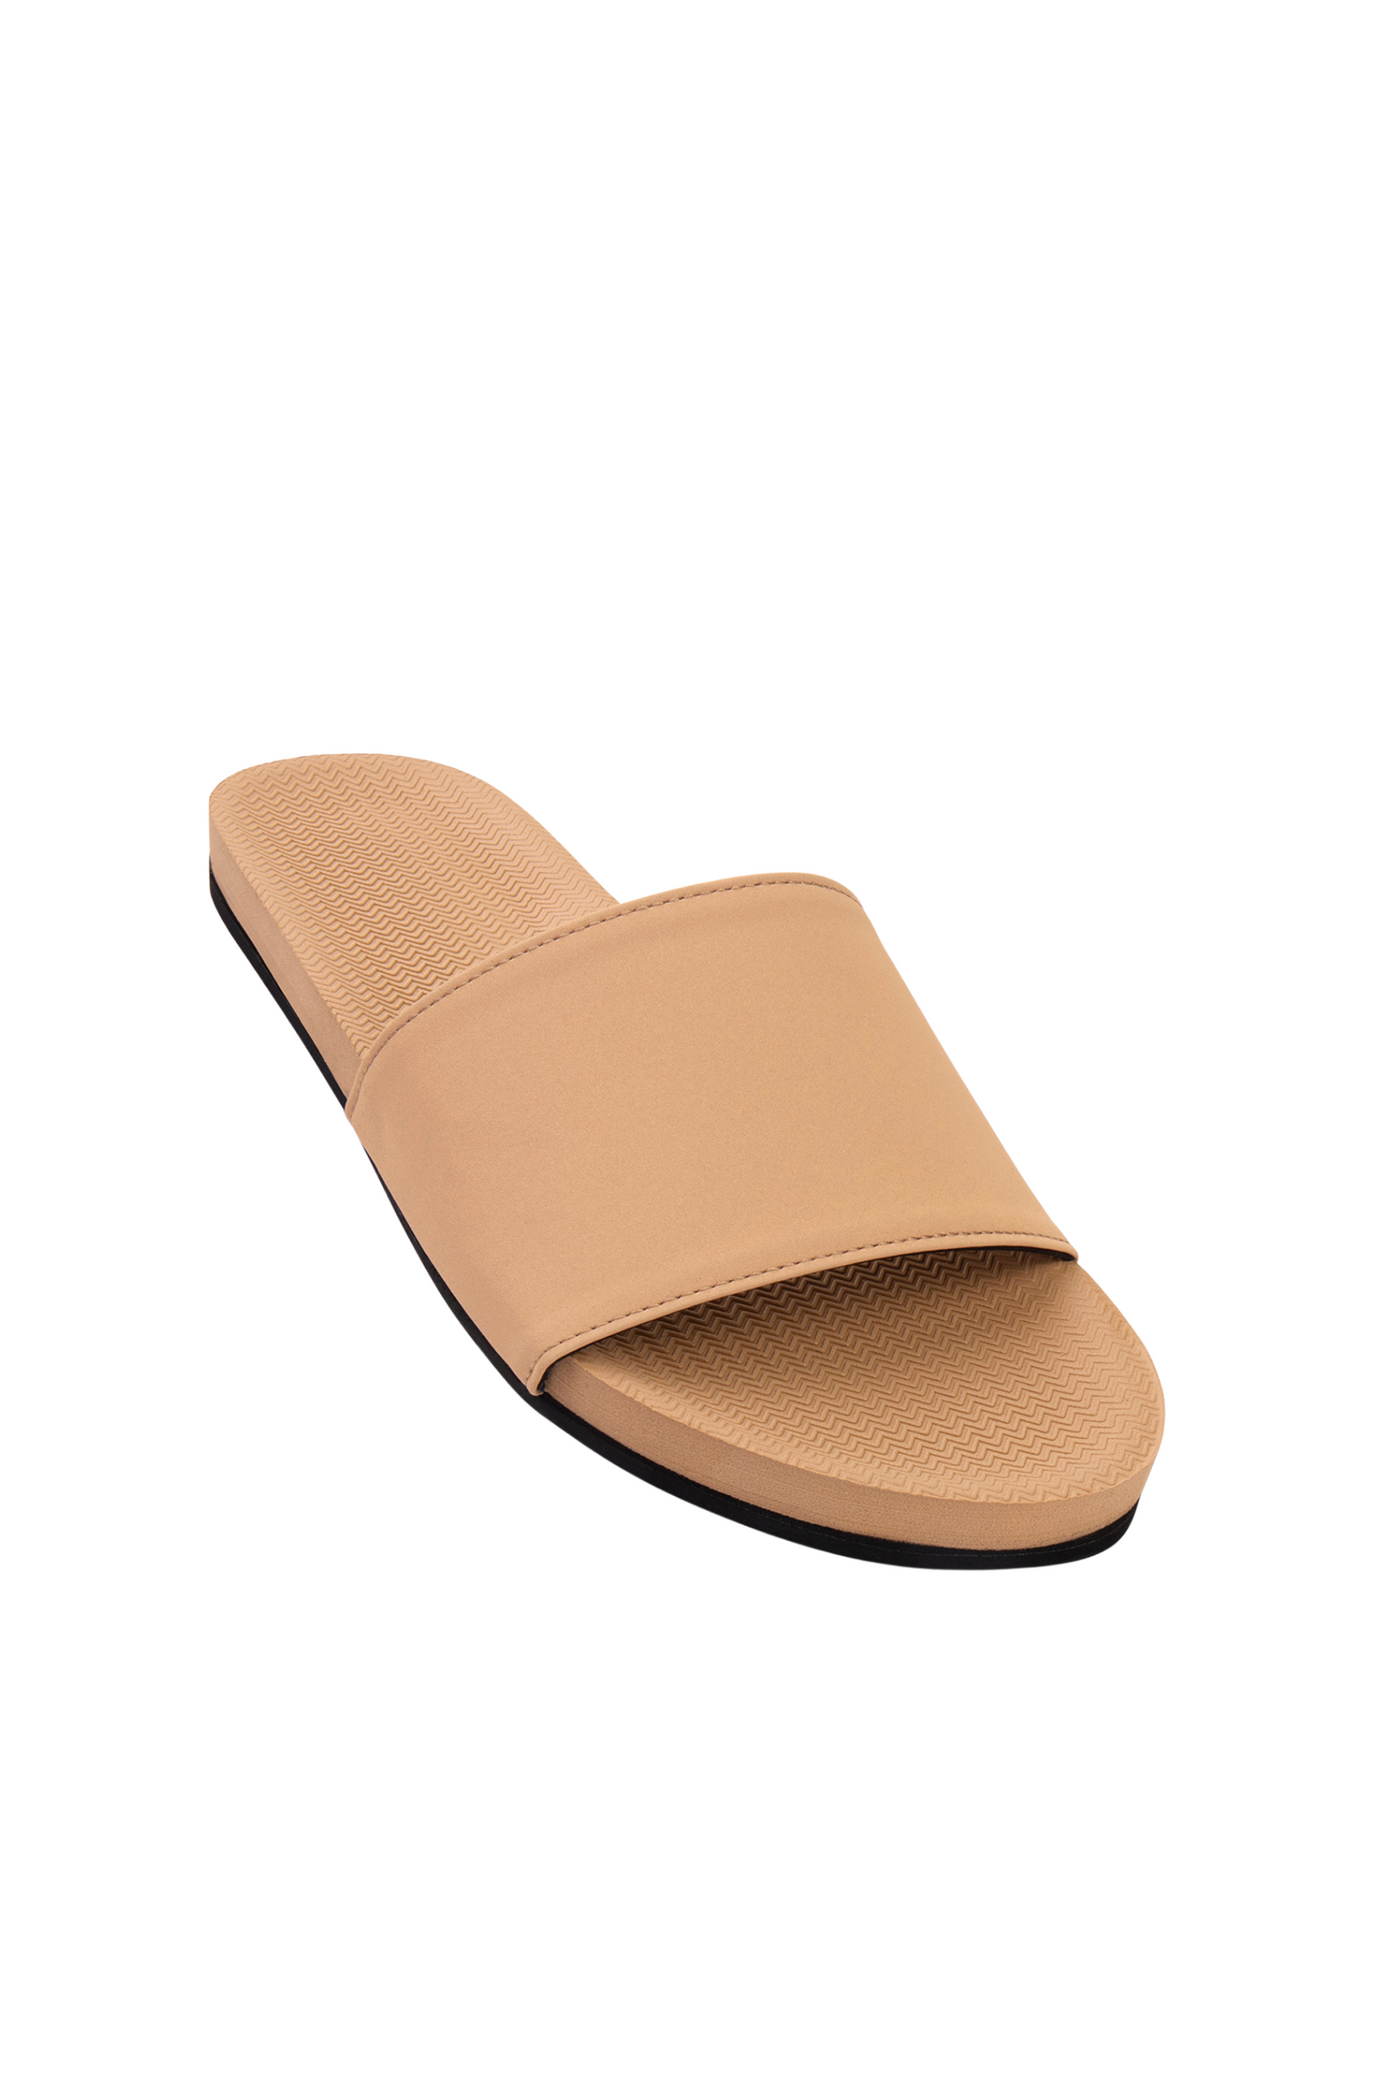 Indosole Women’s ESSNTLS Slides in Light Soil, available on ZERRIN with free Singapore shipping